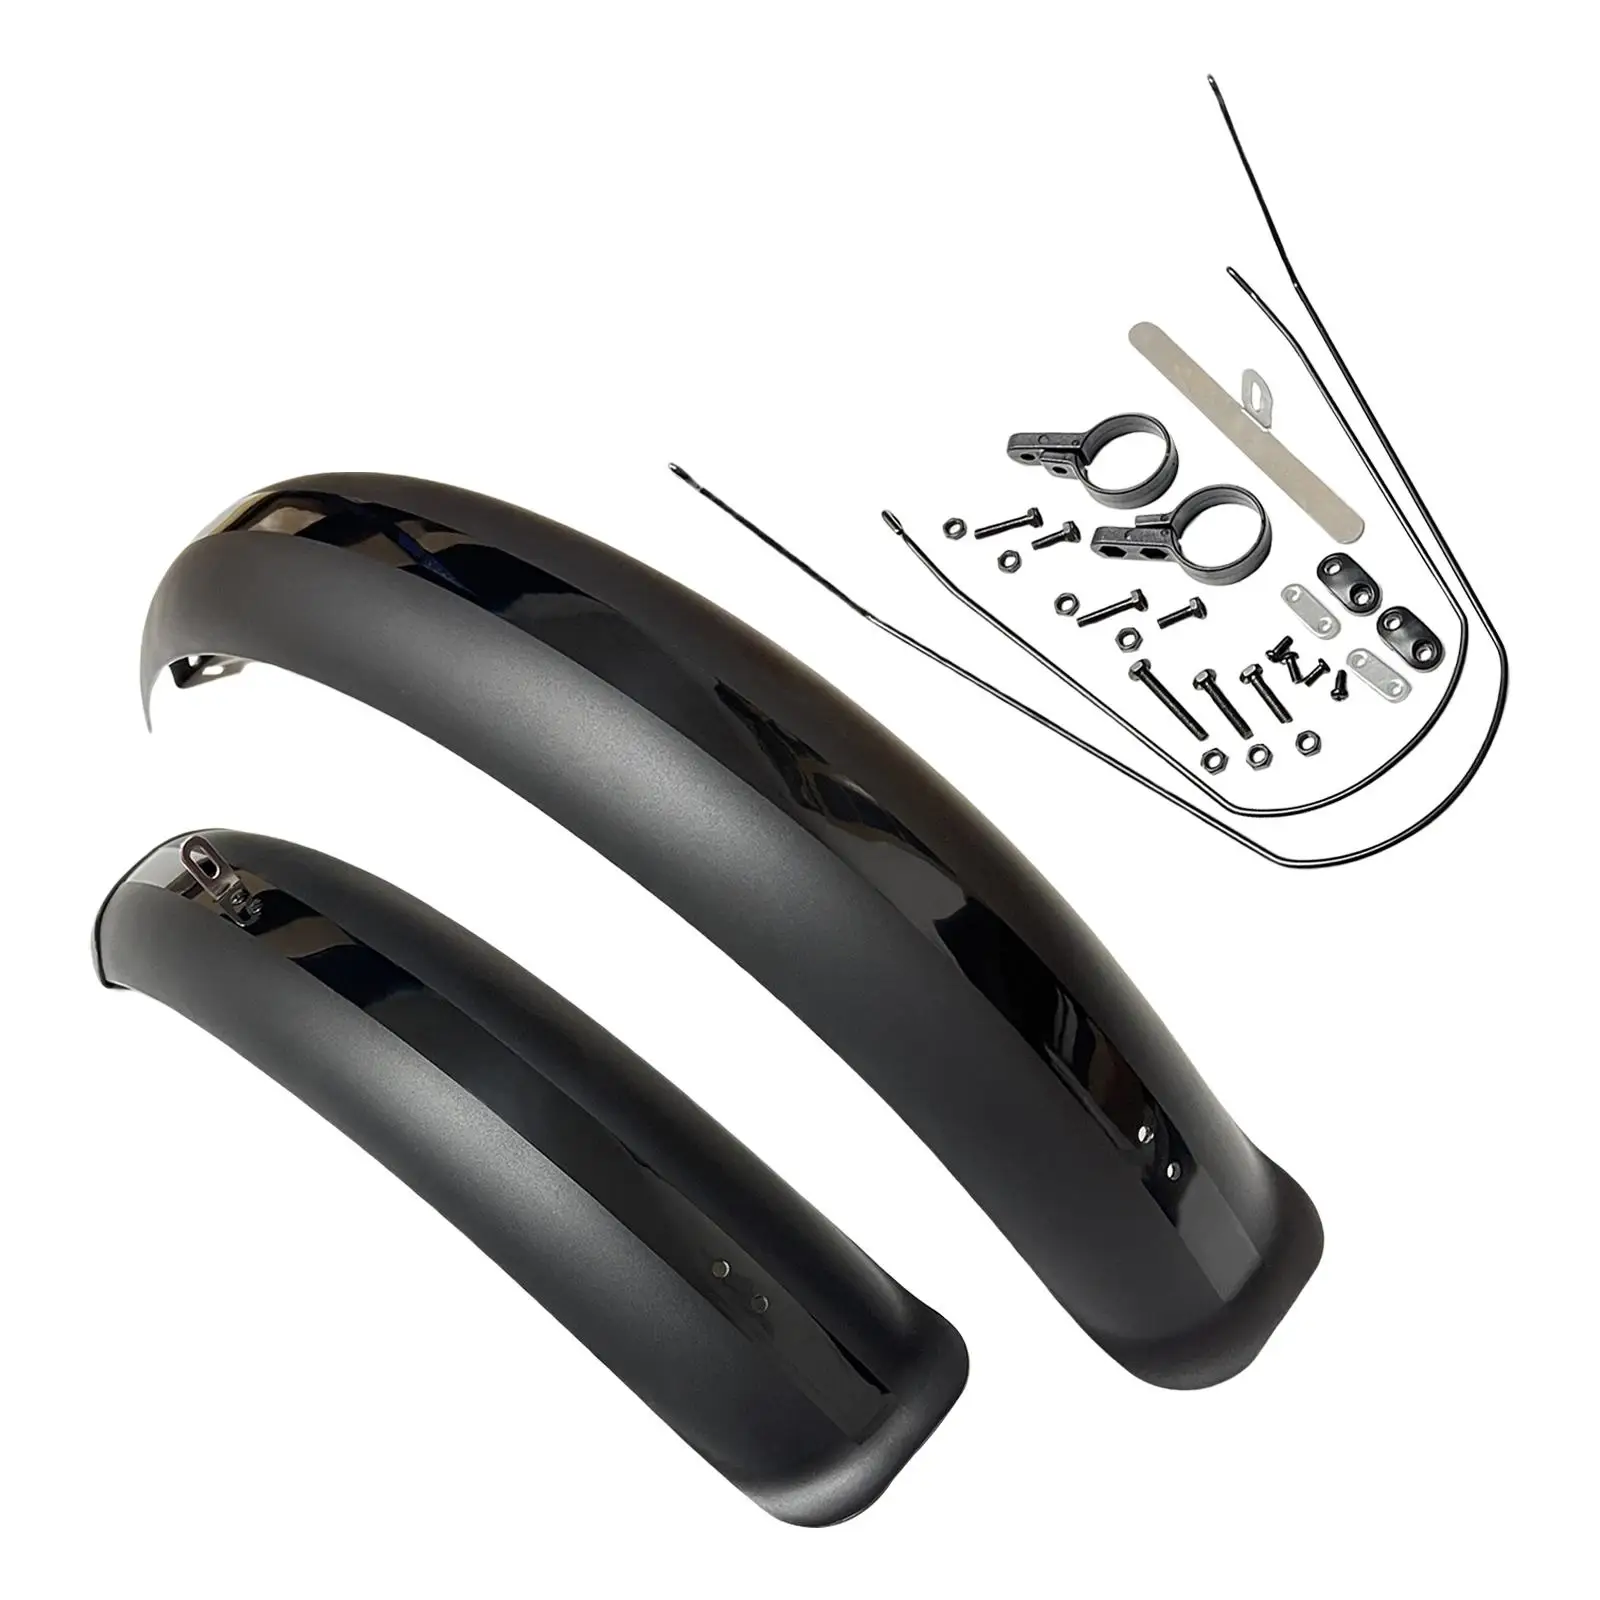 Bike Mudguard Front Rear Set Durable Components Thicken for Mountain Bike